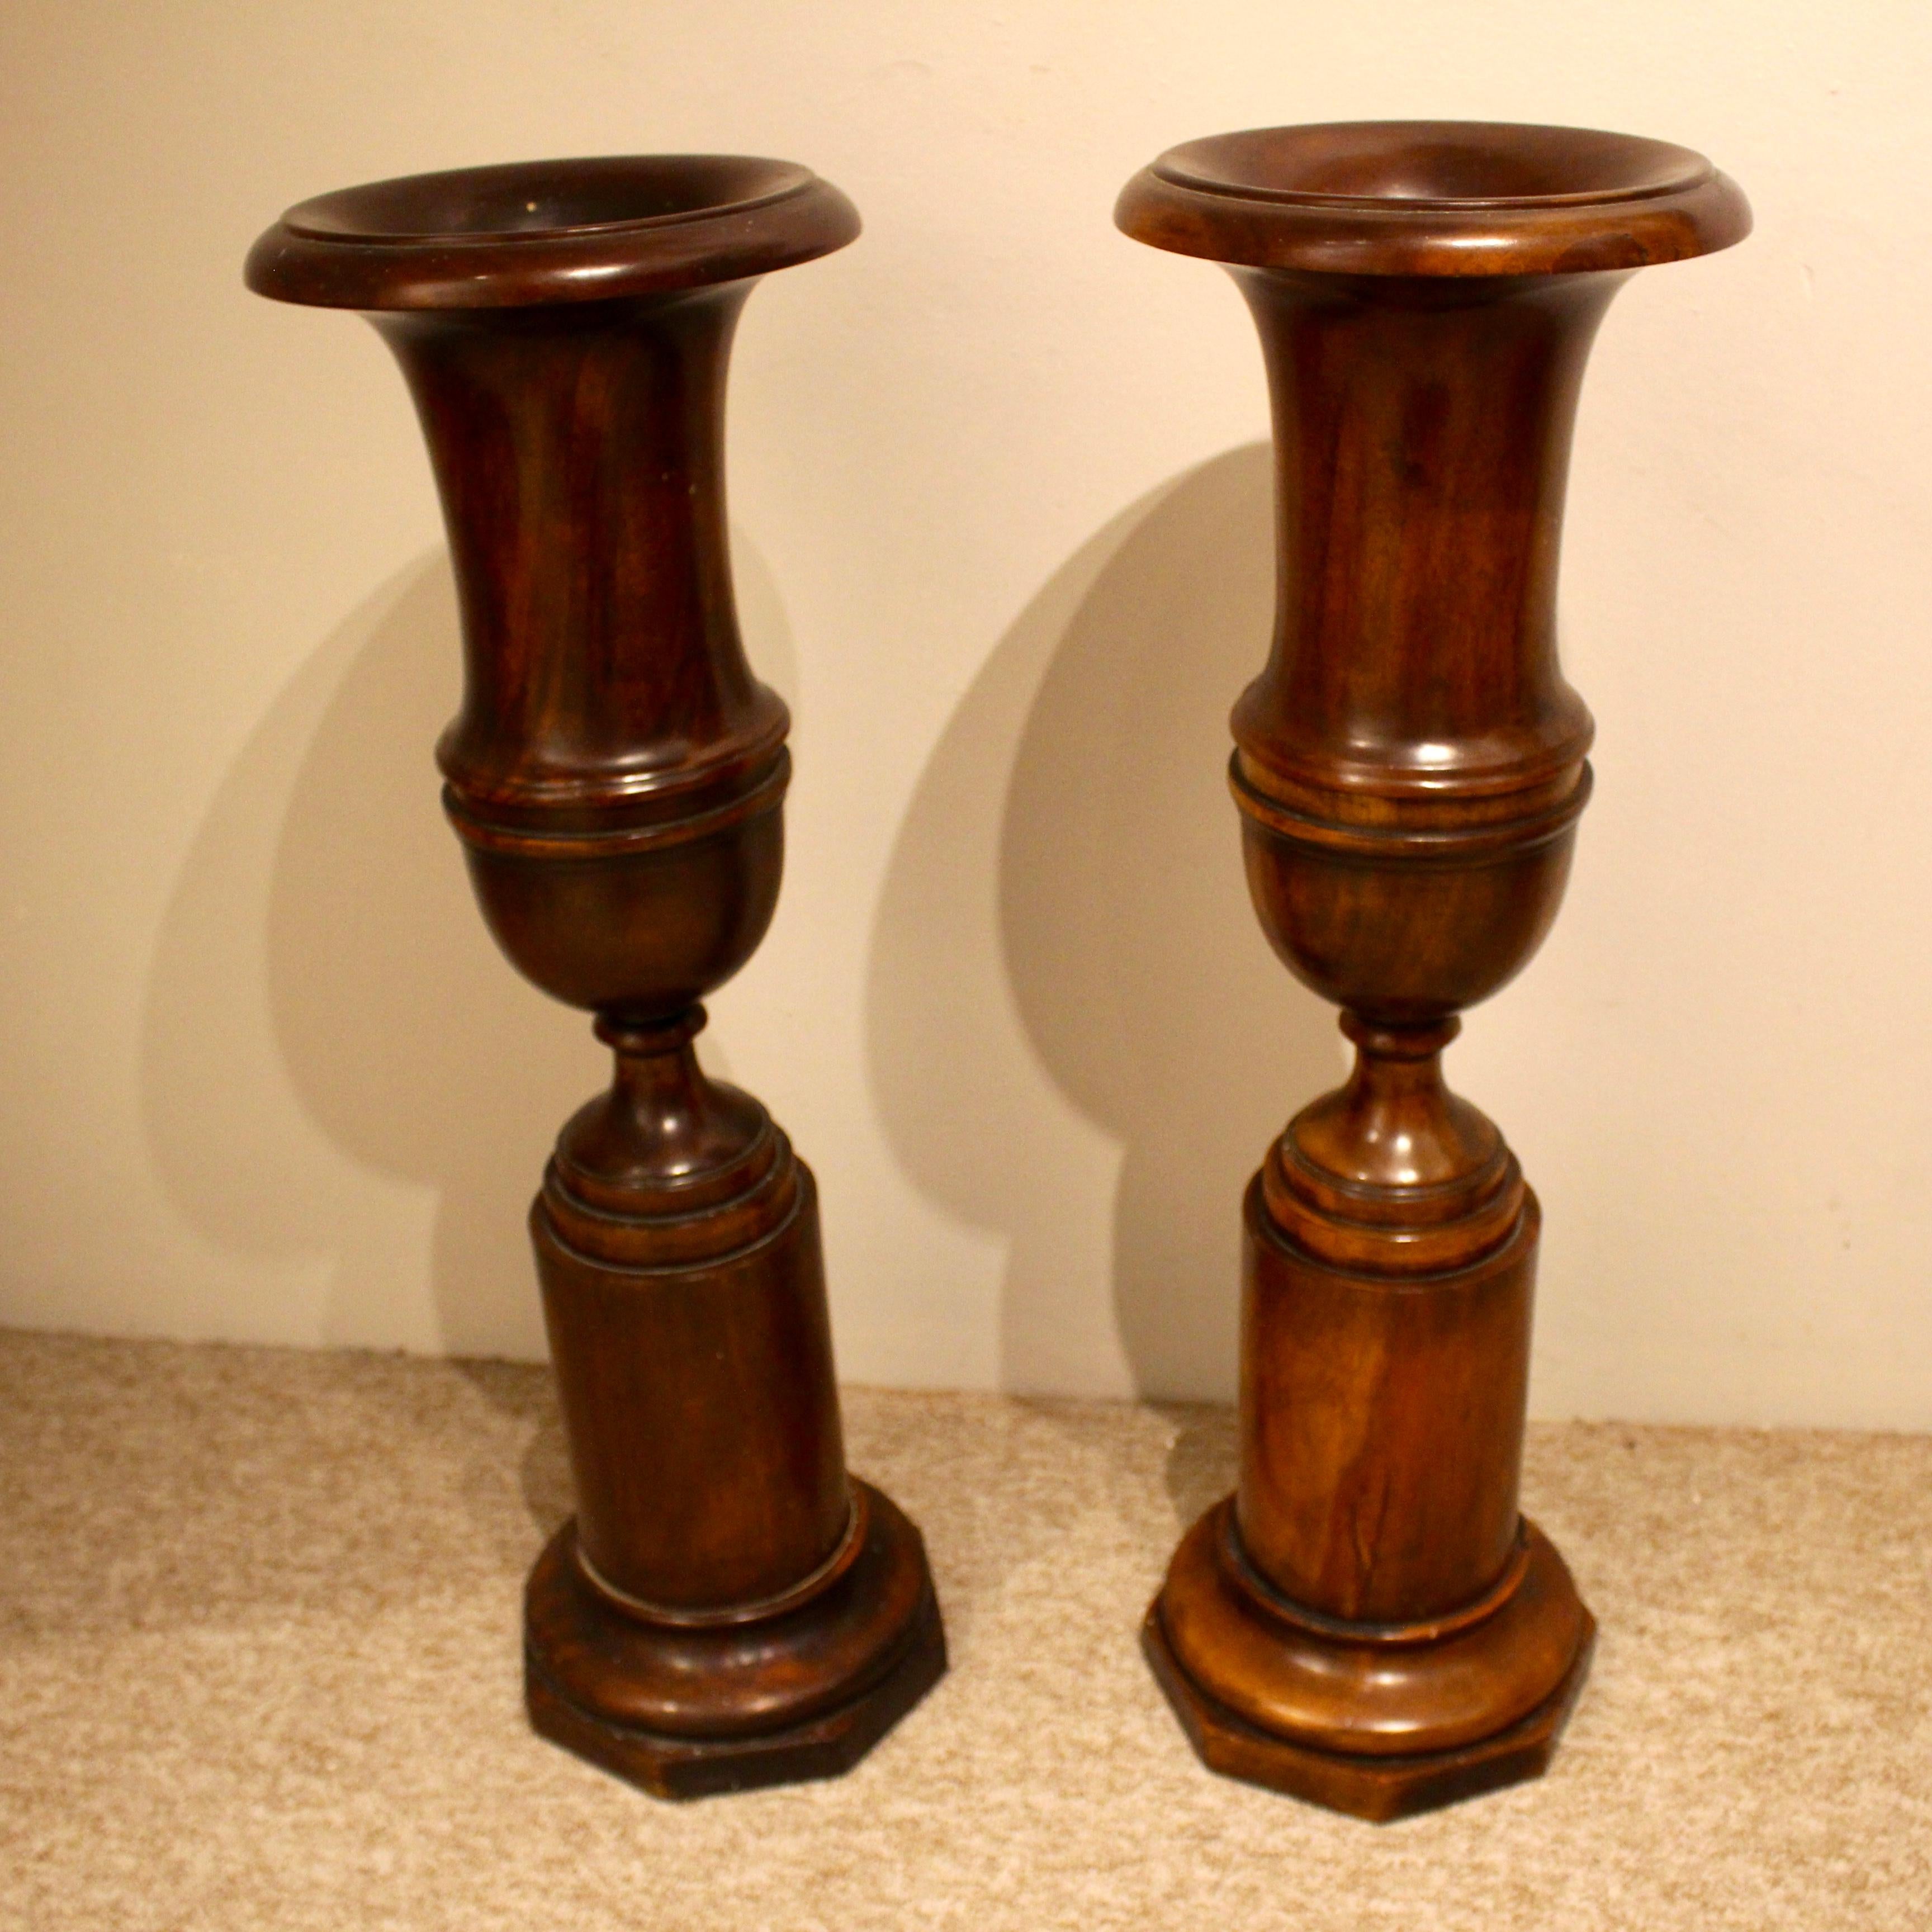 A lovely decorative pair of mahogany urns in the classical form. The Campana shaped upper section sits above a lower cylindrical base with an octagonal foot. Of good size and color. Would suit a modern or period interior.